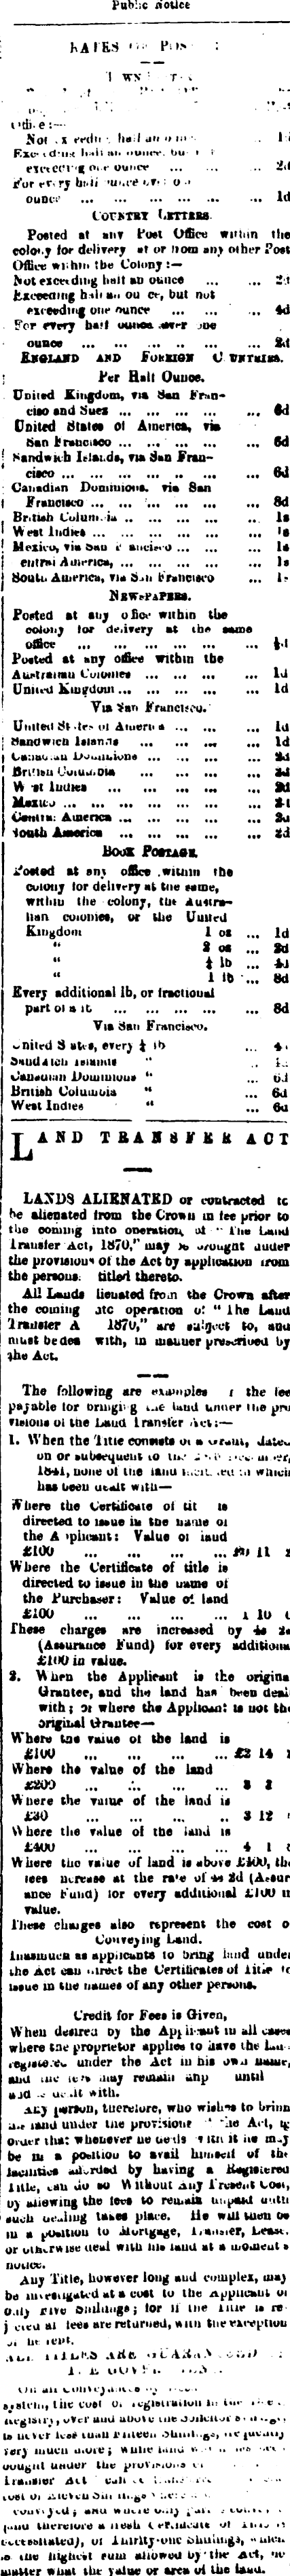 Papers Past Newspapers Inangahua Times 9 November 1885 Page 1 Advertisements Column 5